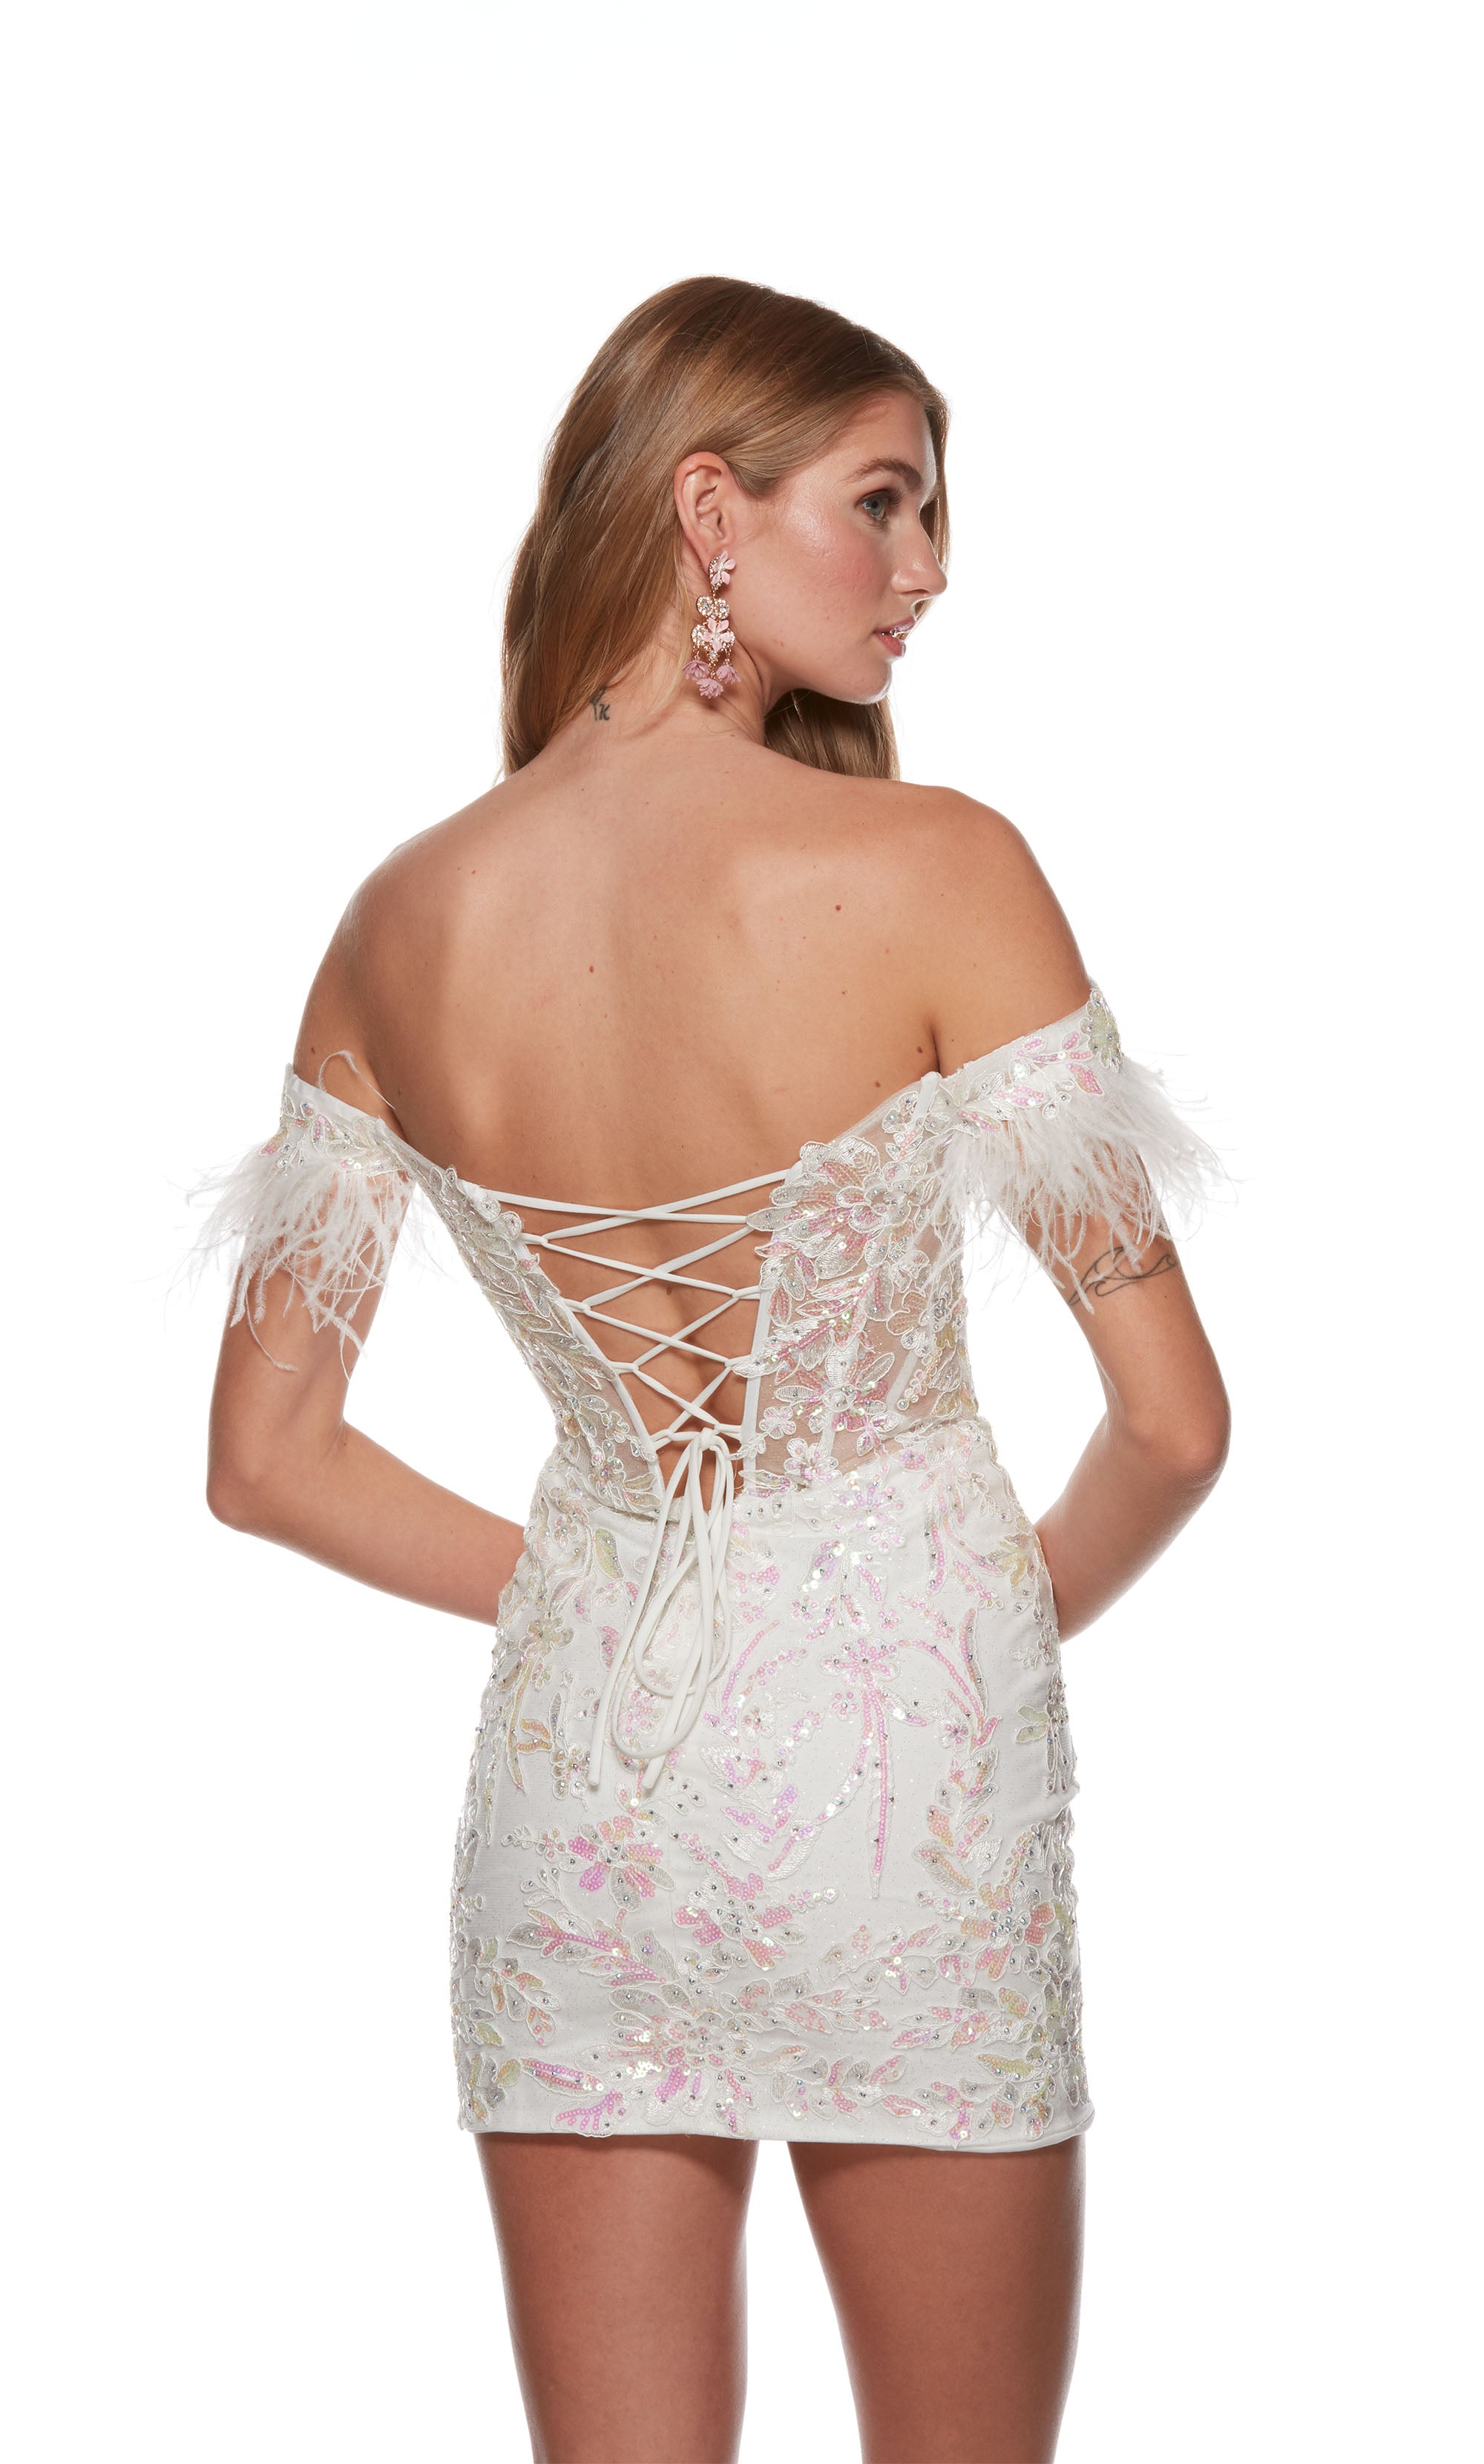 A white, lace-up back corset dress featuring a sheer bodice, feather adorned sleeves, and pink iridescent sequin embellished floral appliques throughout.